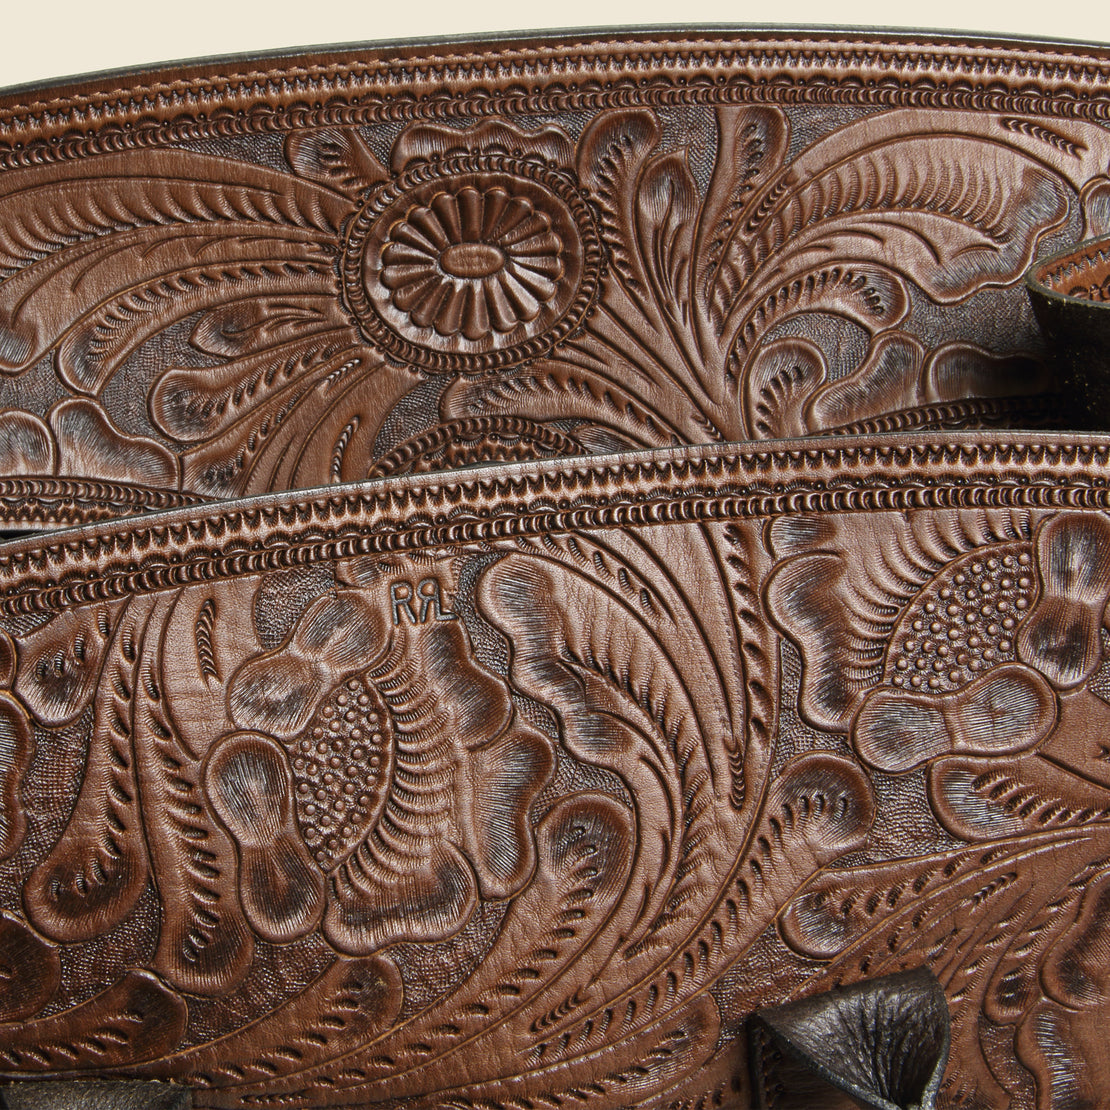 Hand-Tooled Leather Pecos Duffle Bag - Saddle Brown